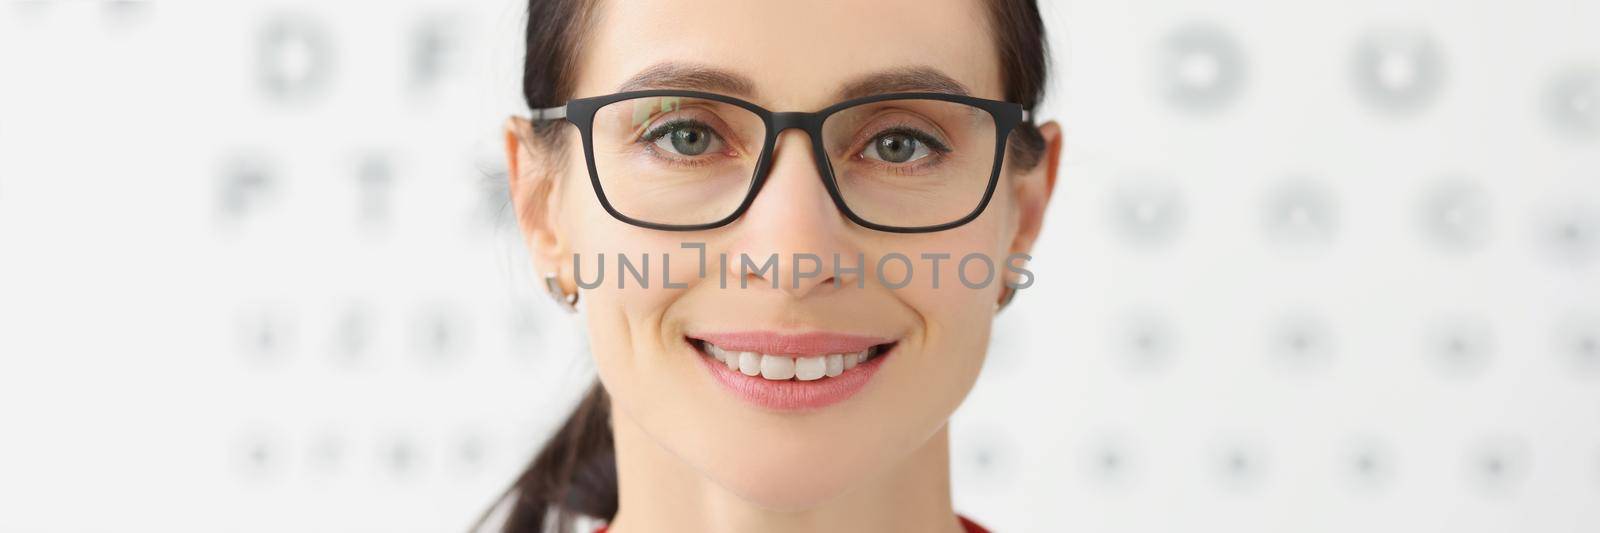 Portrait of smiling female eye doctor with eye test chart on background, female optician in glasses, appointment in eye clinic. Ophthalmologist concept